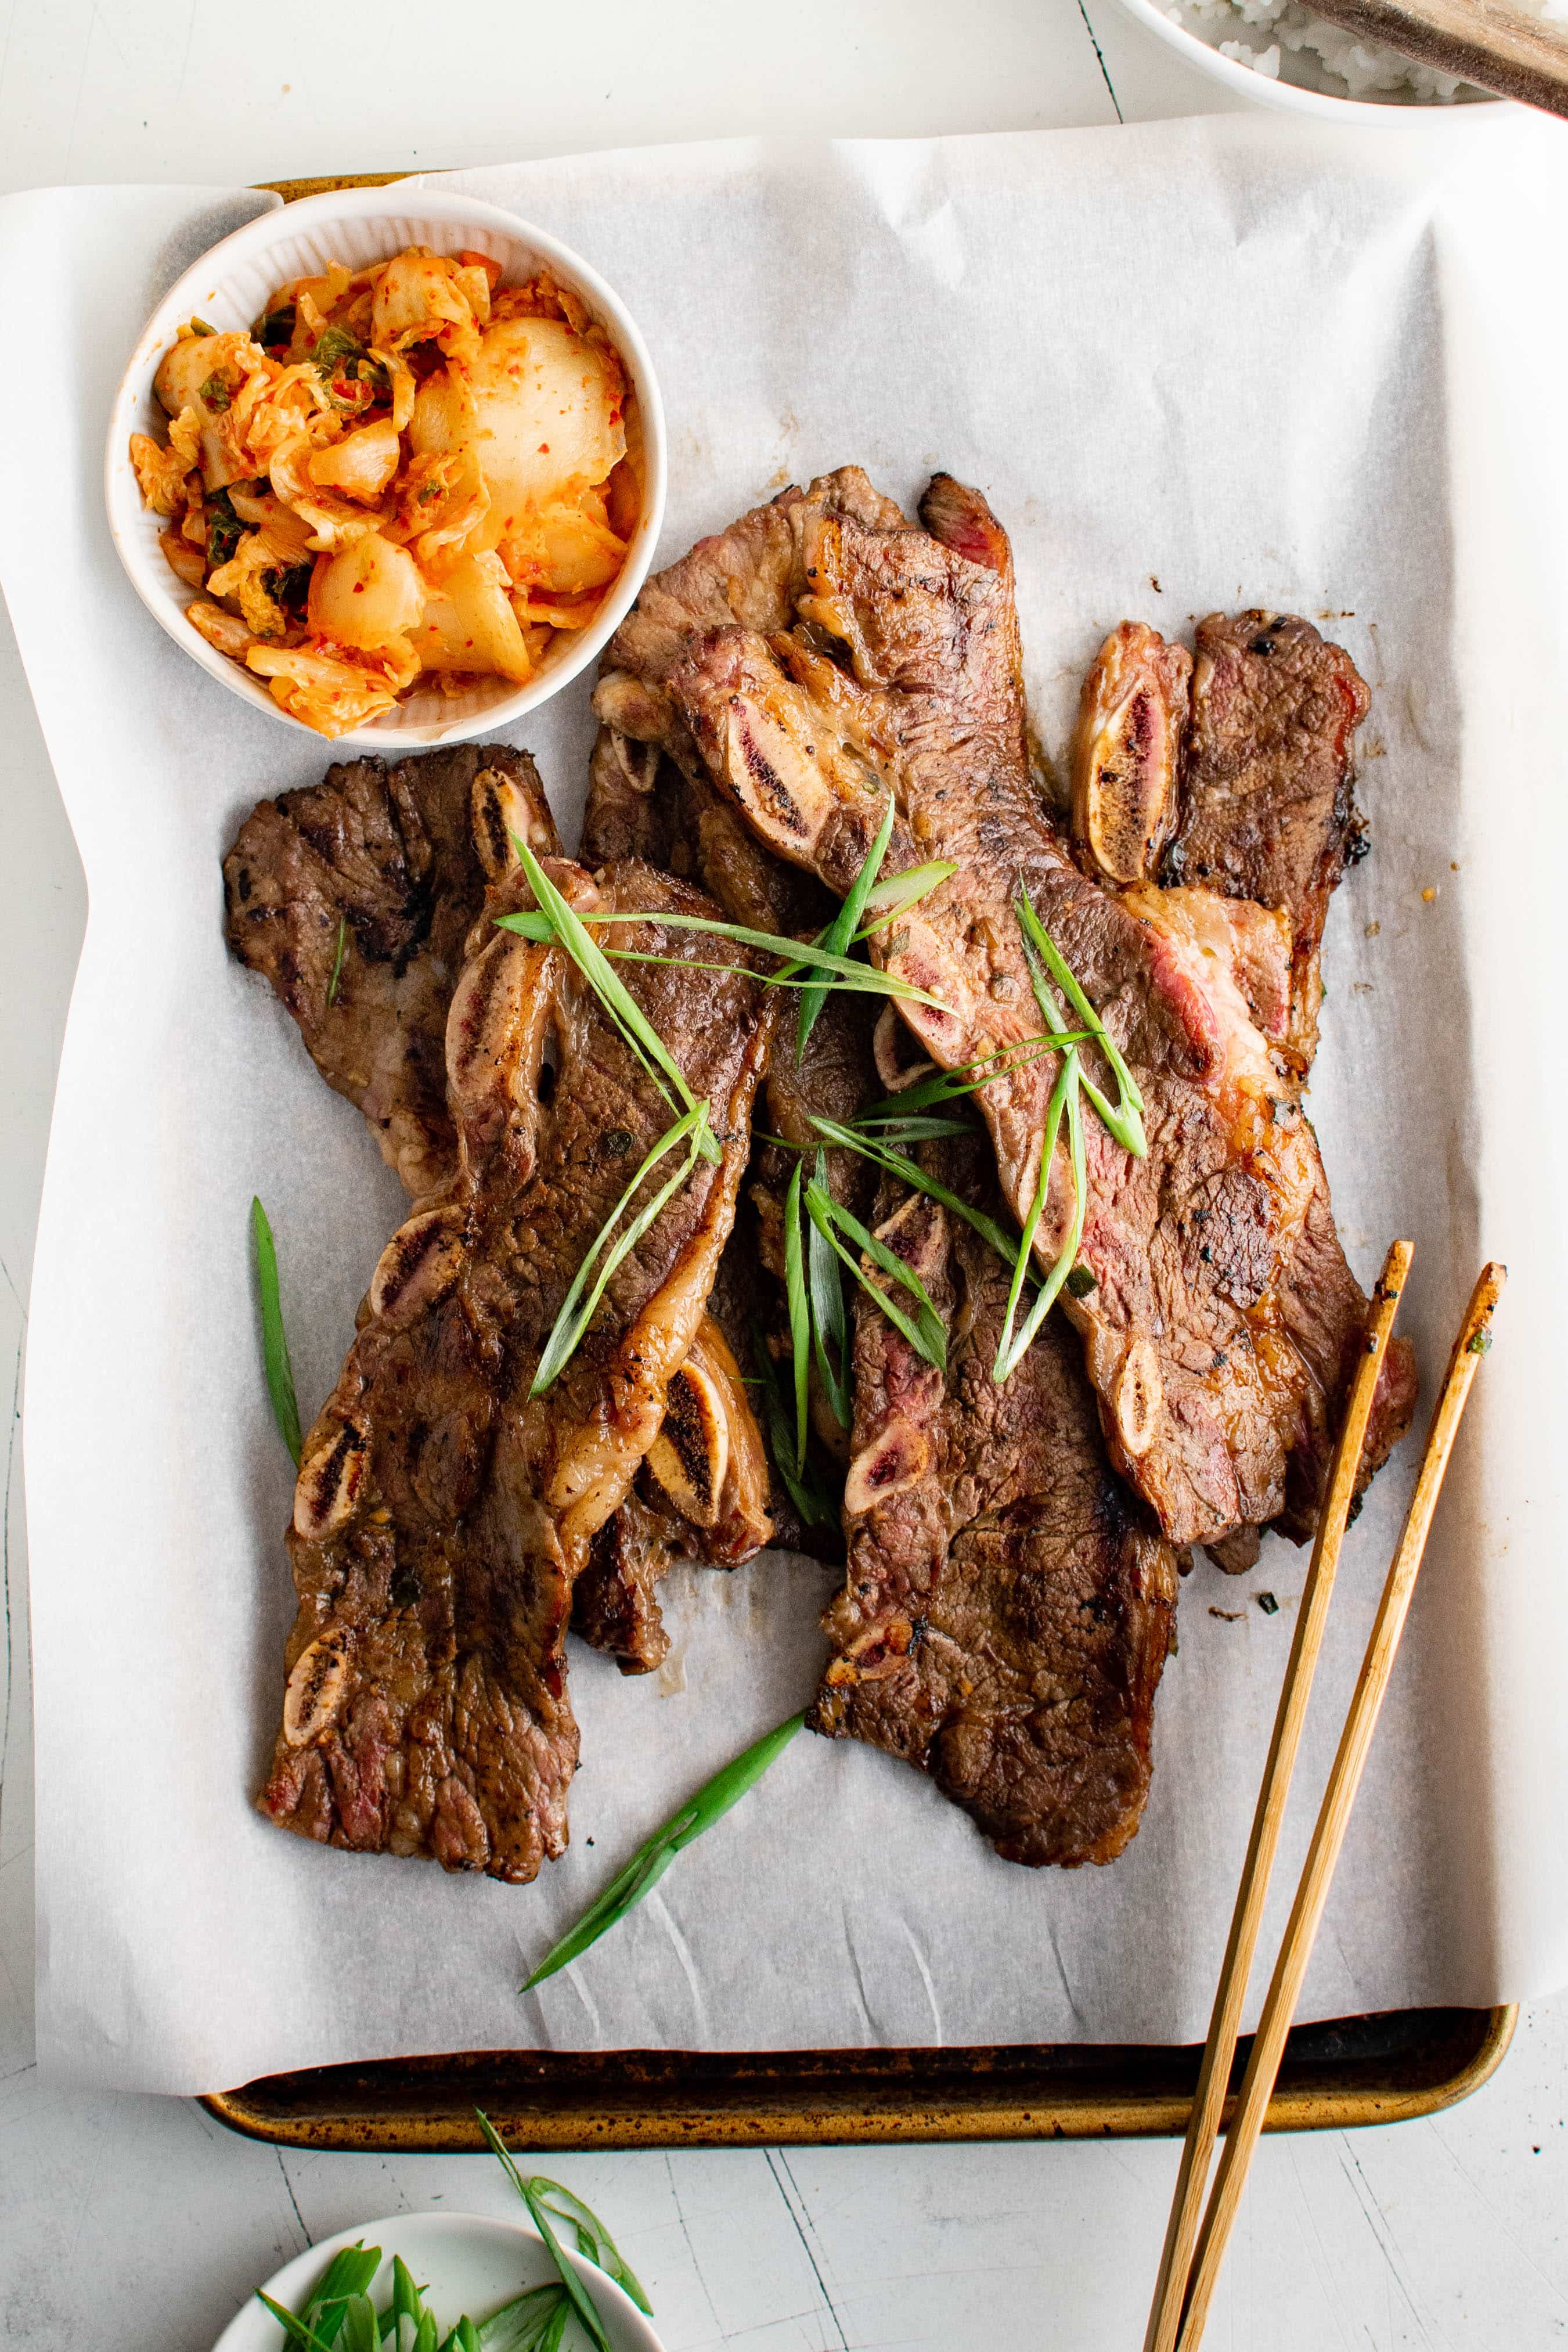 Grilled Kalbi (Korean BBQ Beef Short Ribs) on a baking sheet lined with parchment paper and garnished with thinly sliced green onions and served with a side of kimchi.